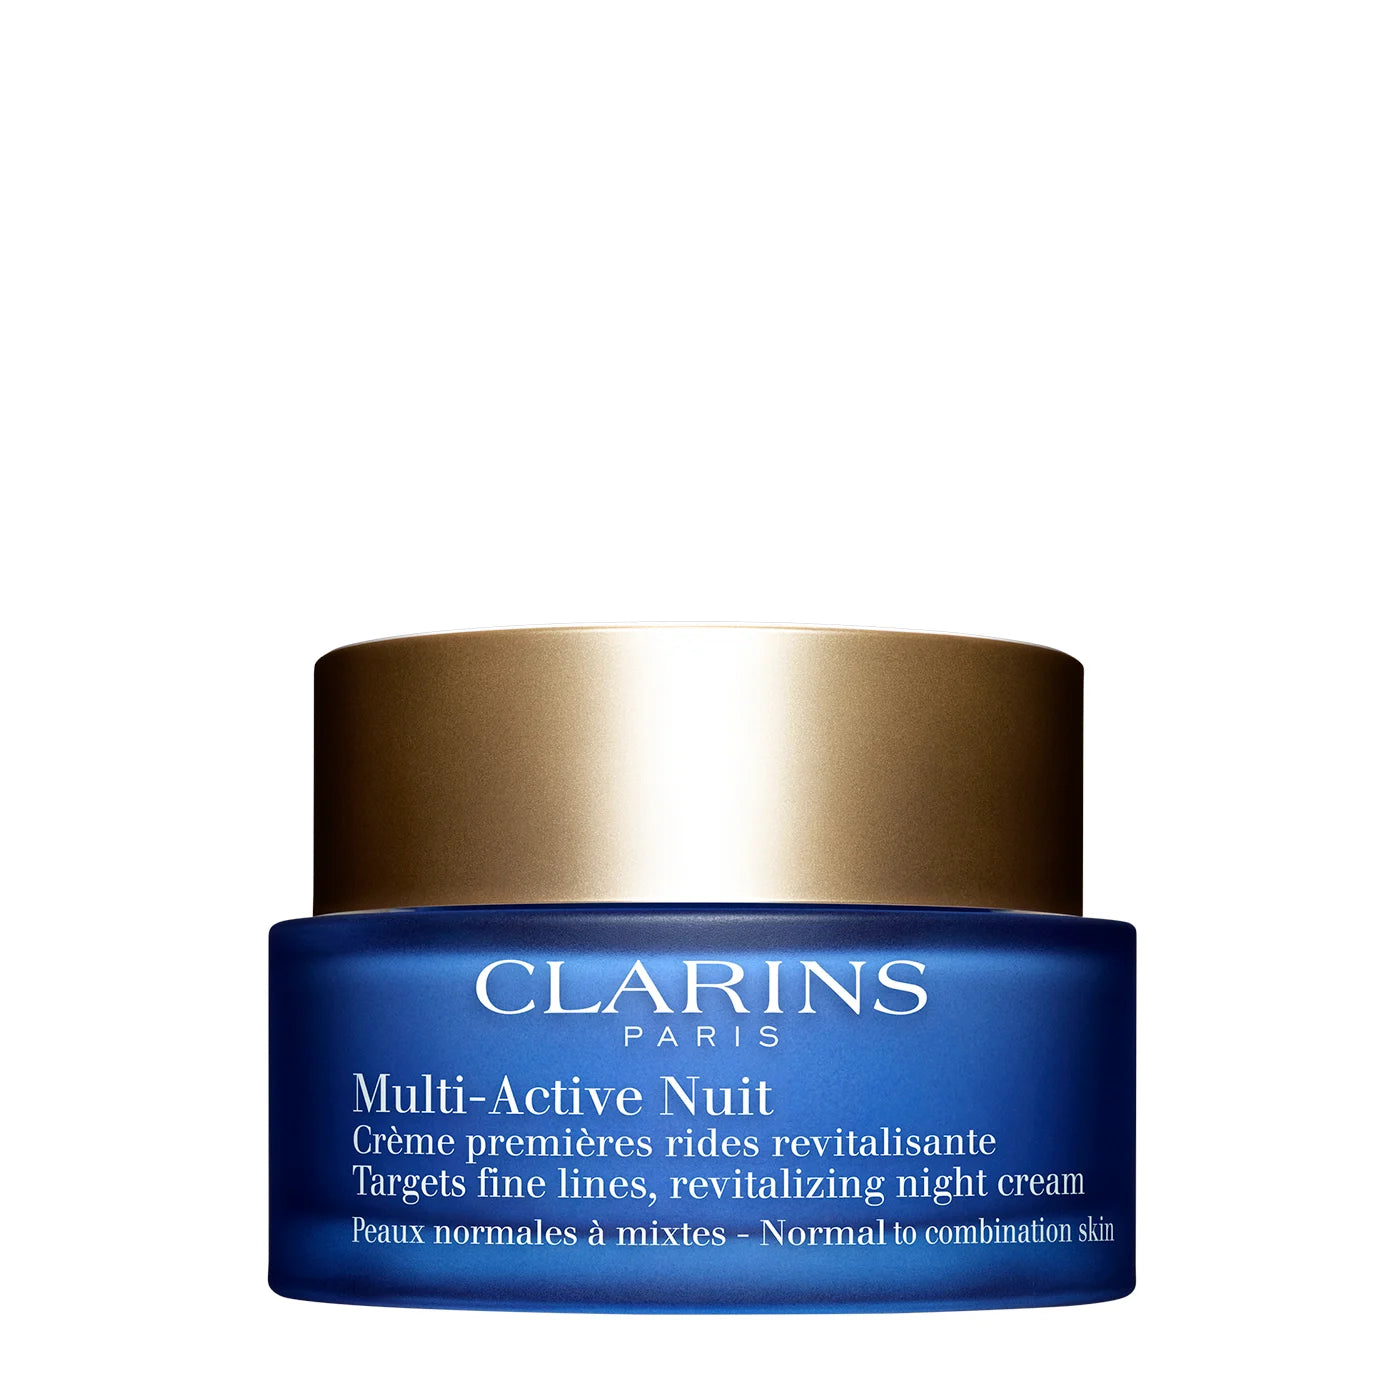 Clarins - Multi-Active Nuit - Cream for Normal to Combination (50ml)